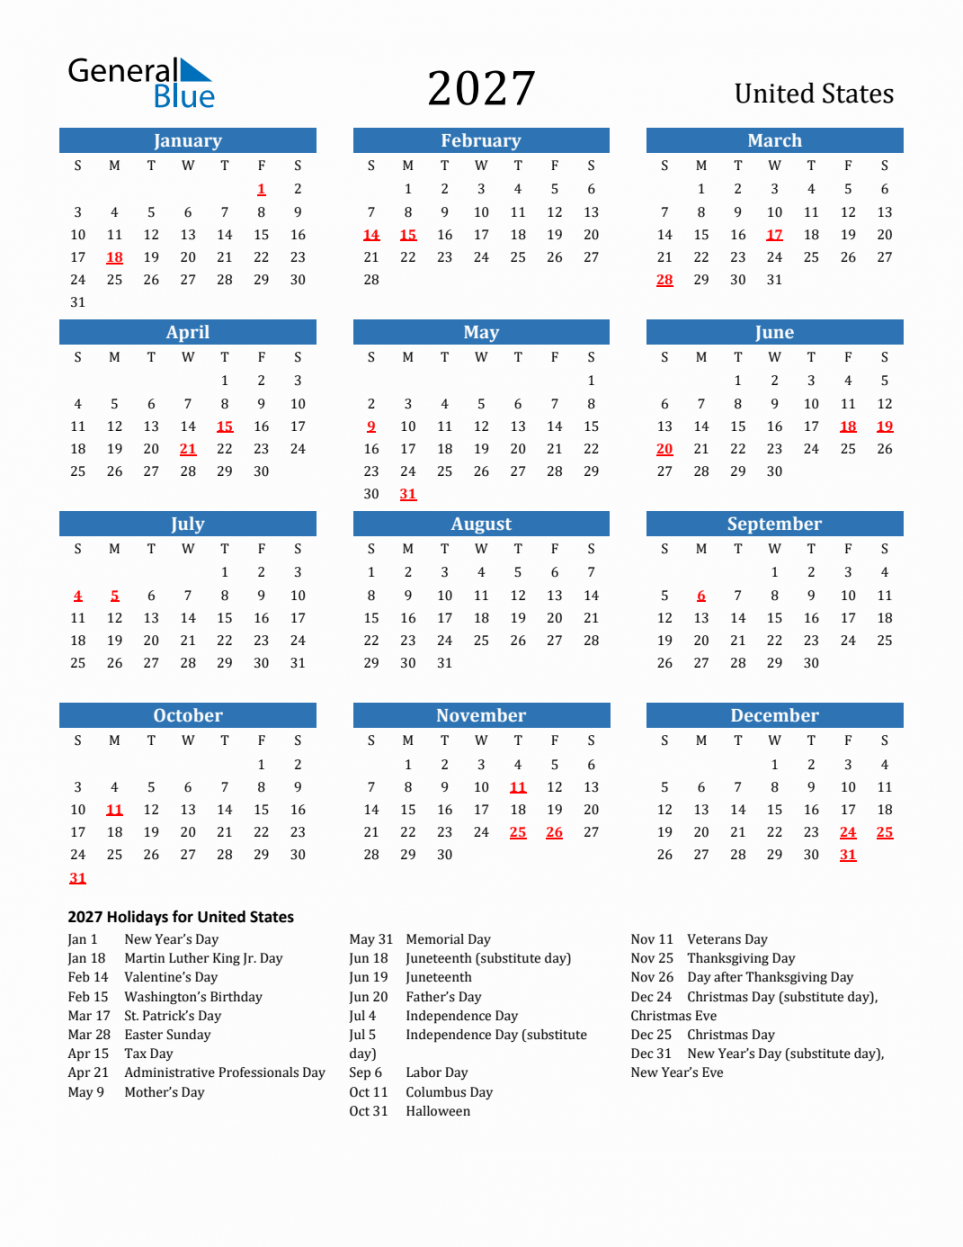 United States Calendar with Holidays